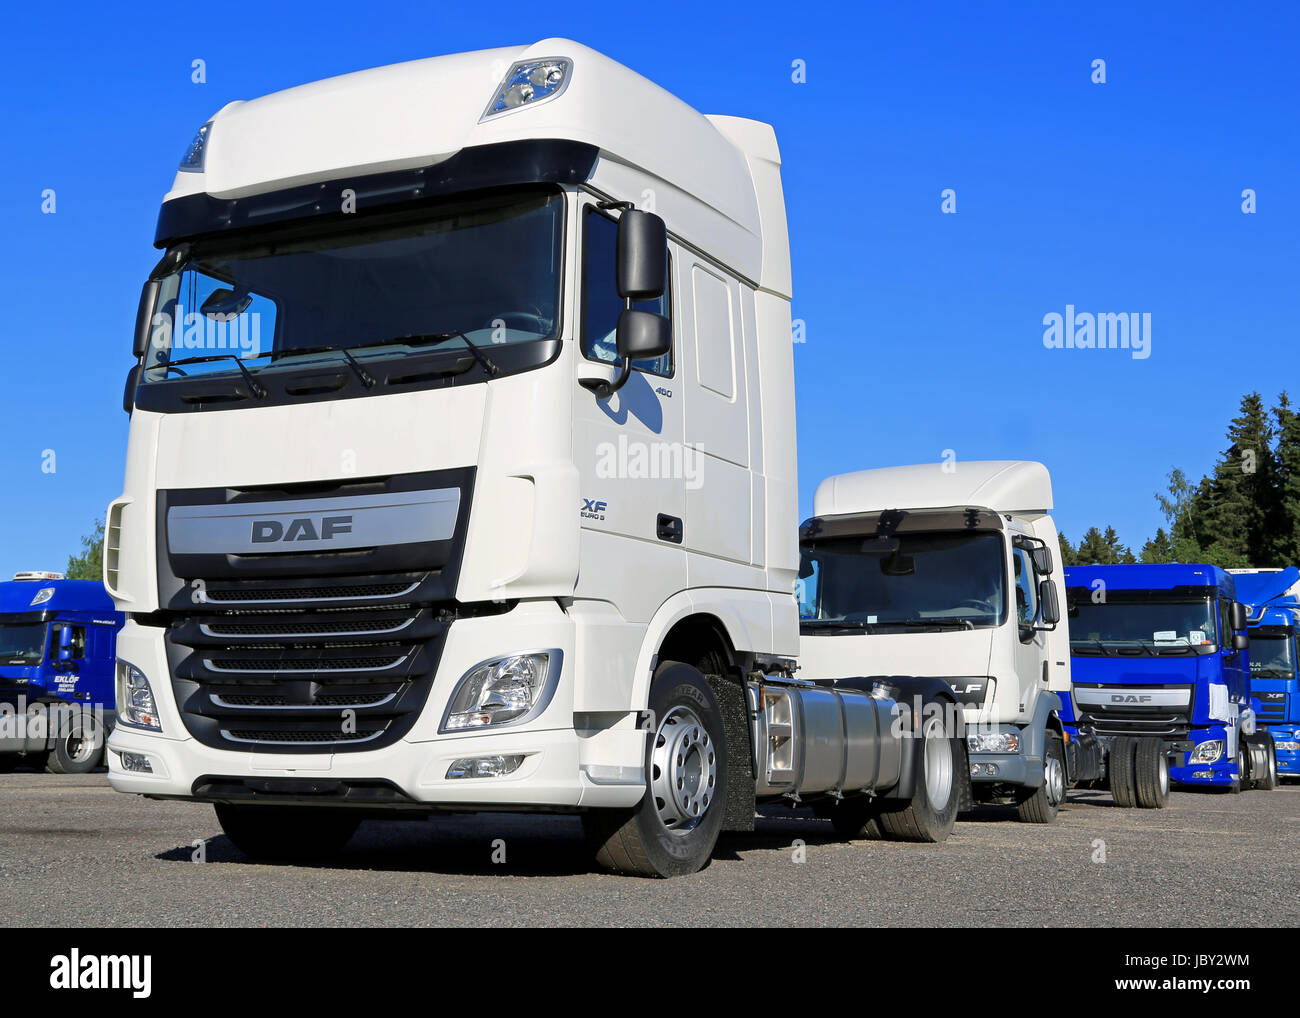 RAJAMAKI, FINLAND - JUNE 28, 2014: New, white DAF XF Euro 6 truck on a yard with a group of DAF trucks. The new XF is powered by PACCAR MX-13 and MX-11 engines. Stock Photo